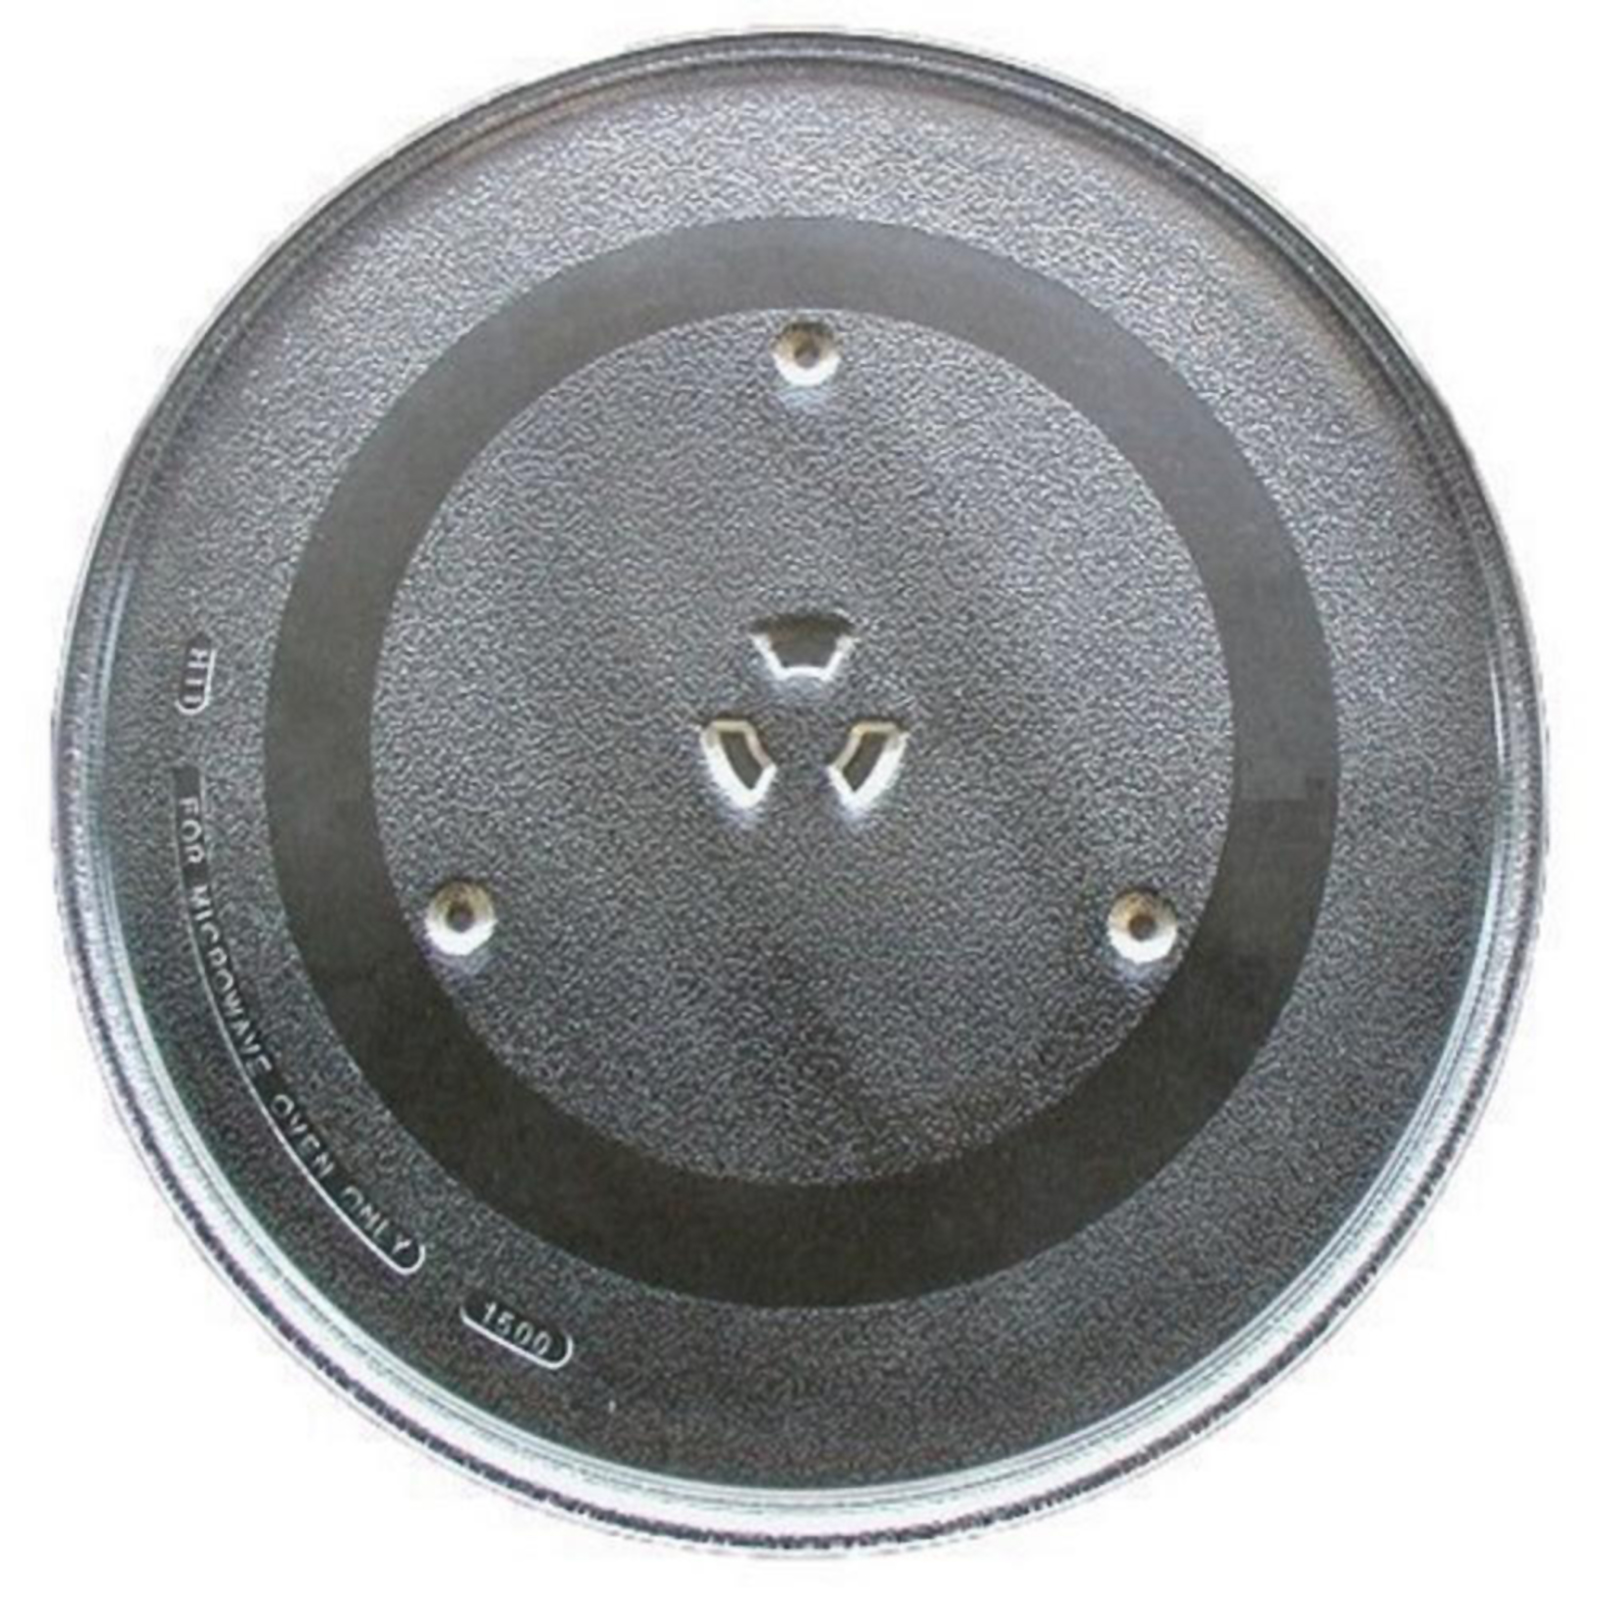 Frigidaire 5304464116 13-1/2" Microwave Glass Turntable Plate/Tray